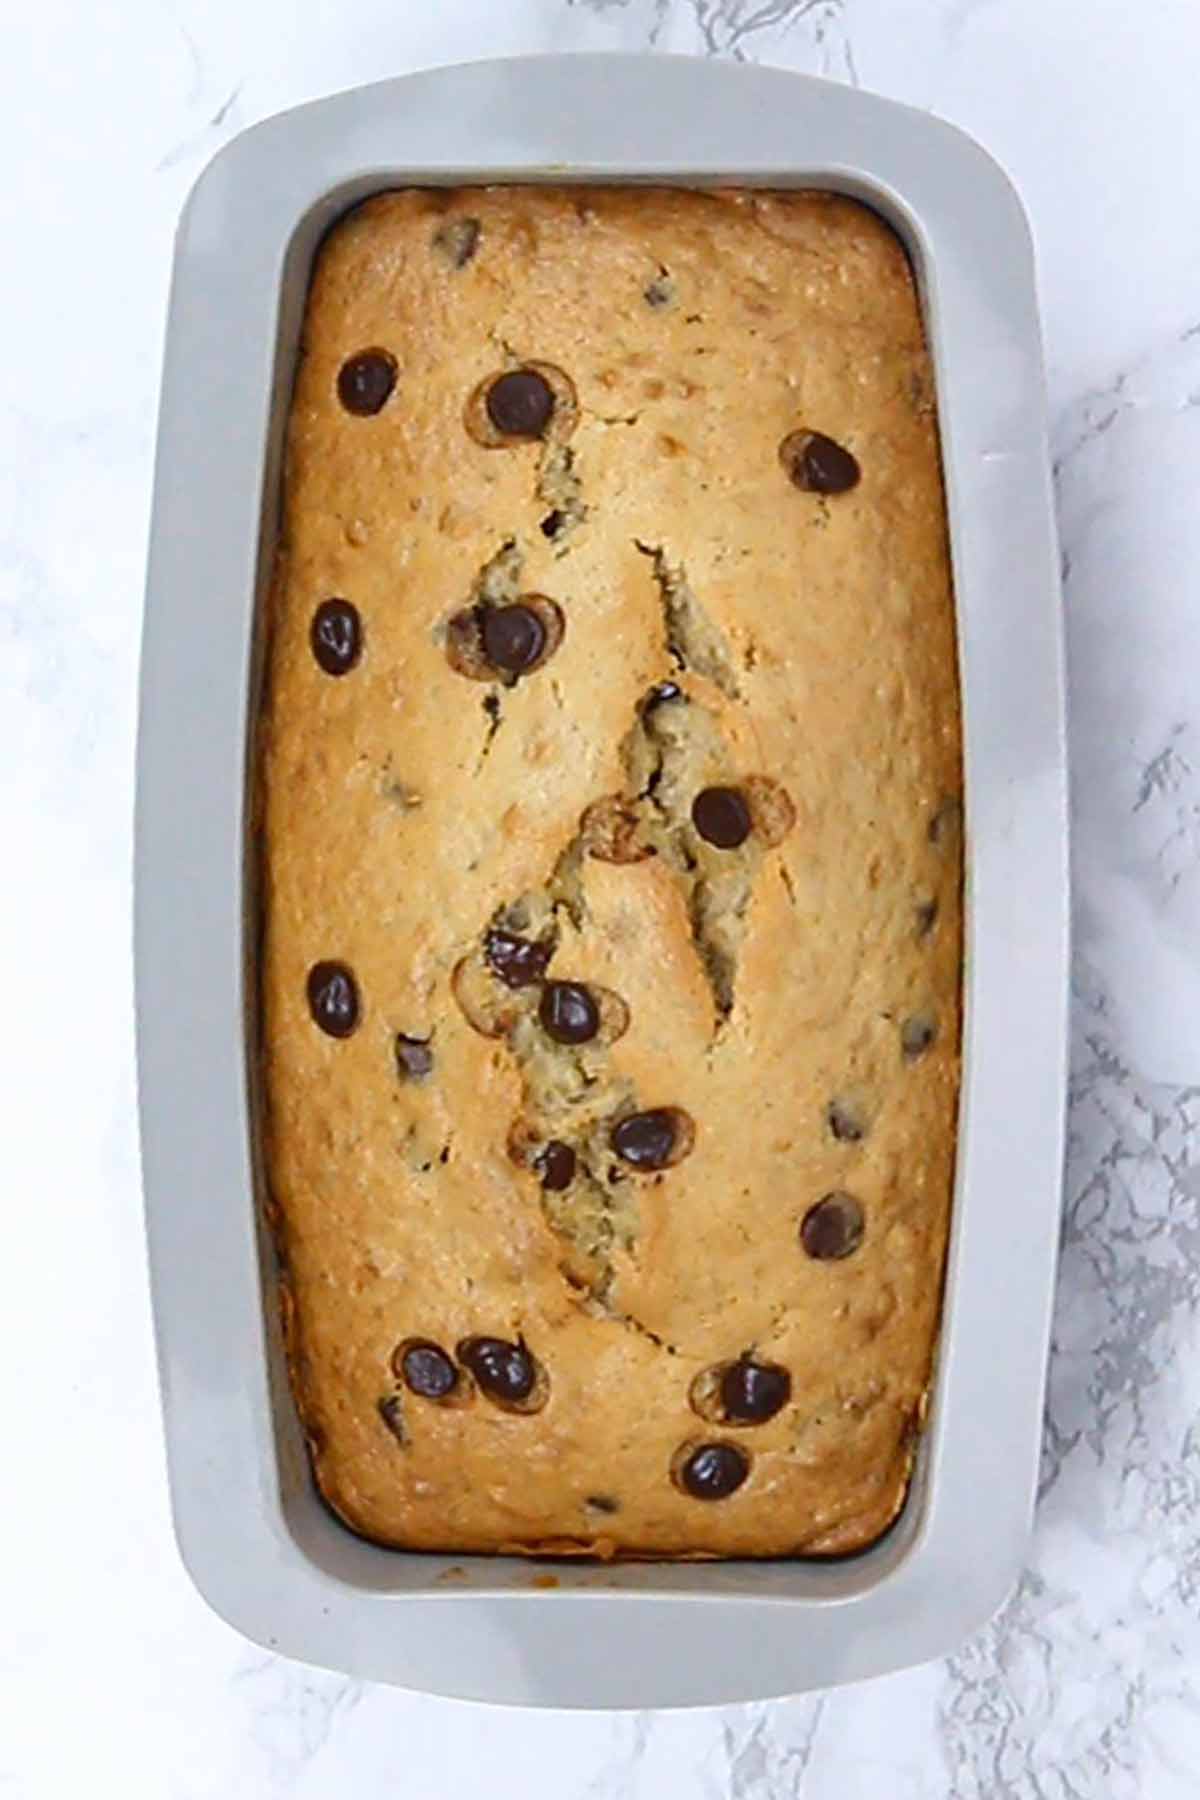 Baked Banana Bread With Chocolate Chips In It